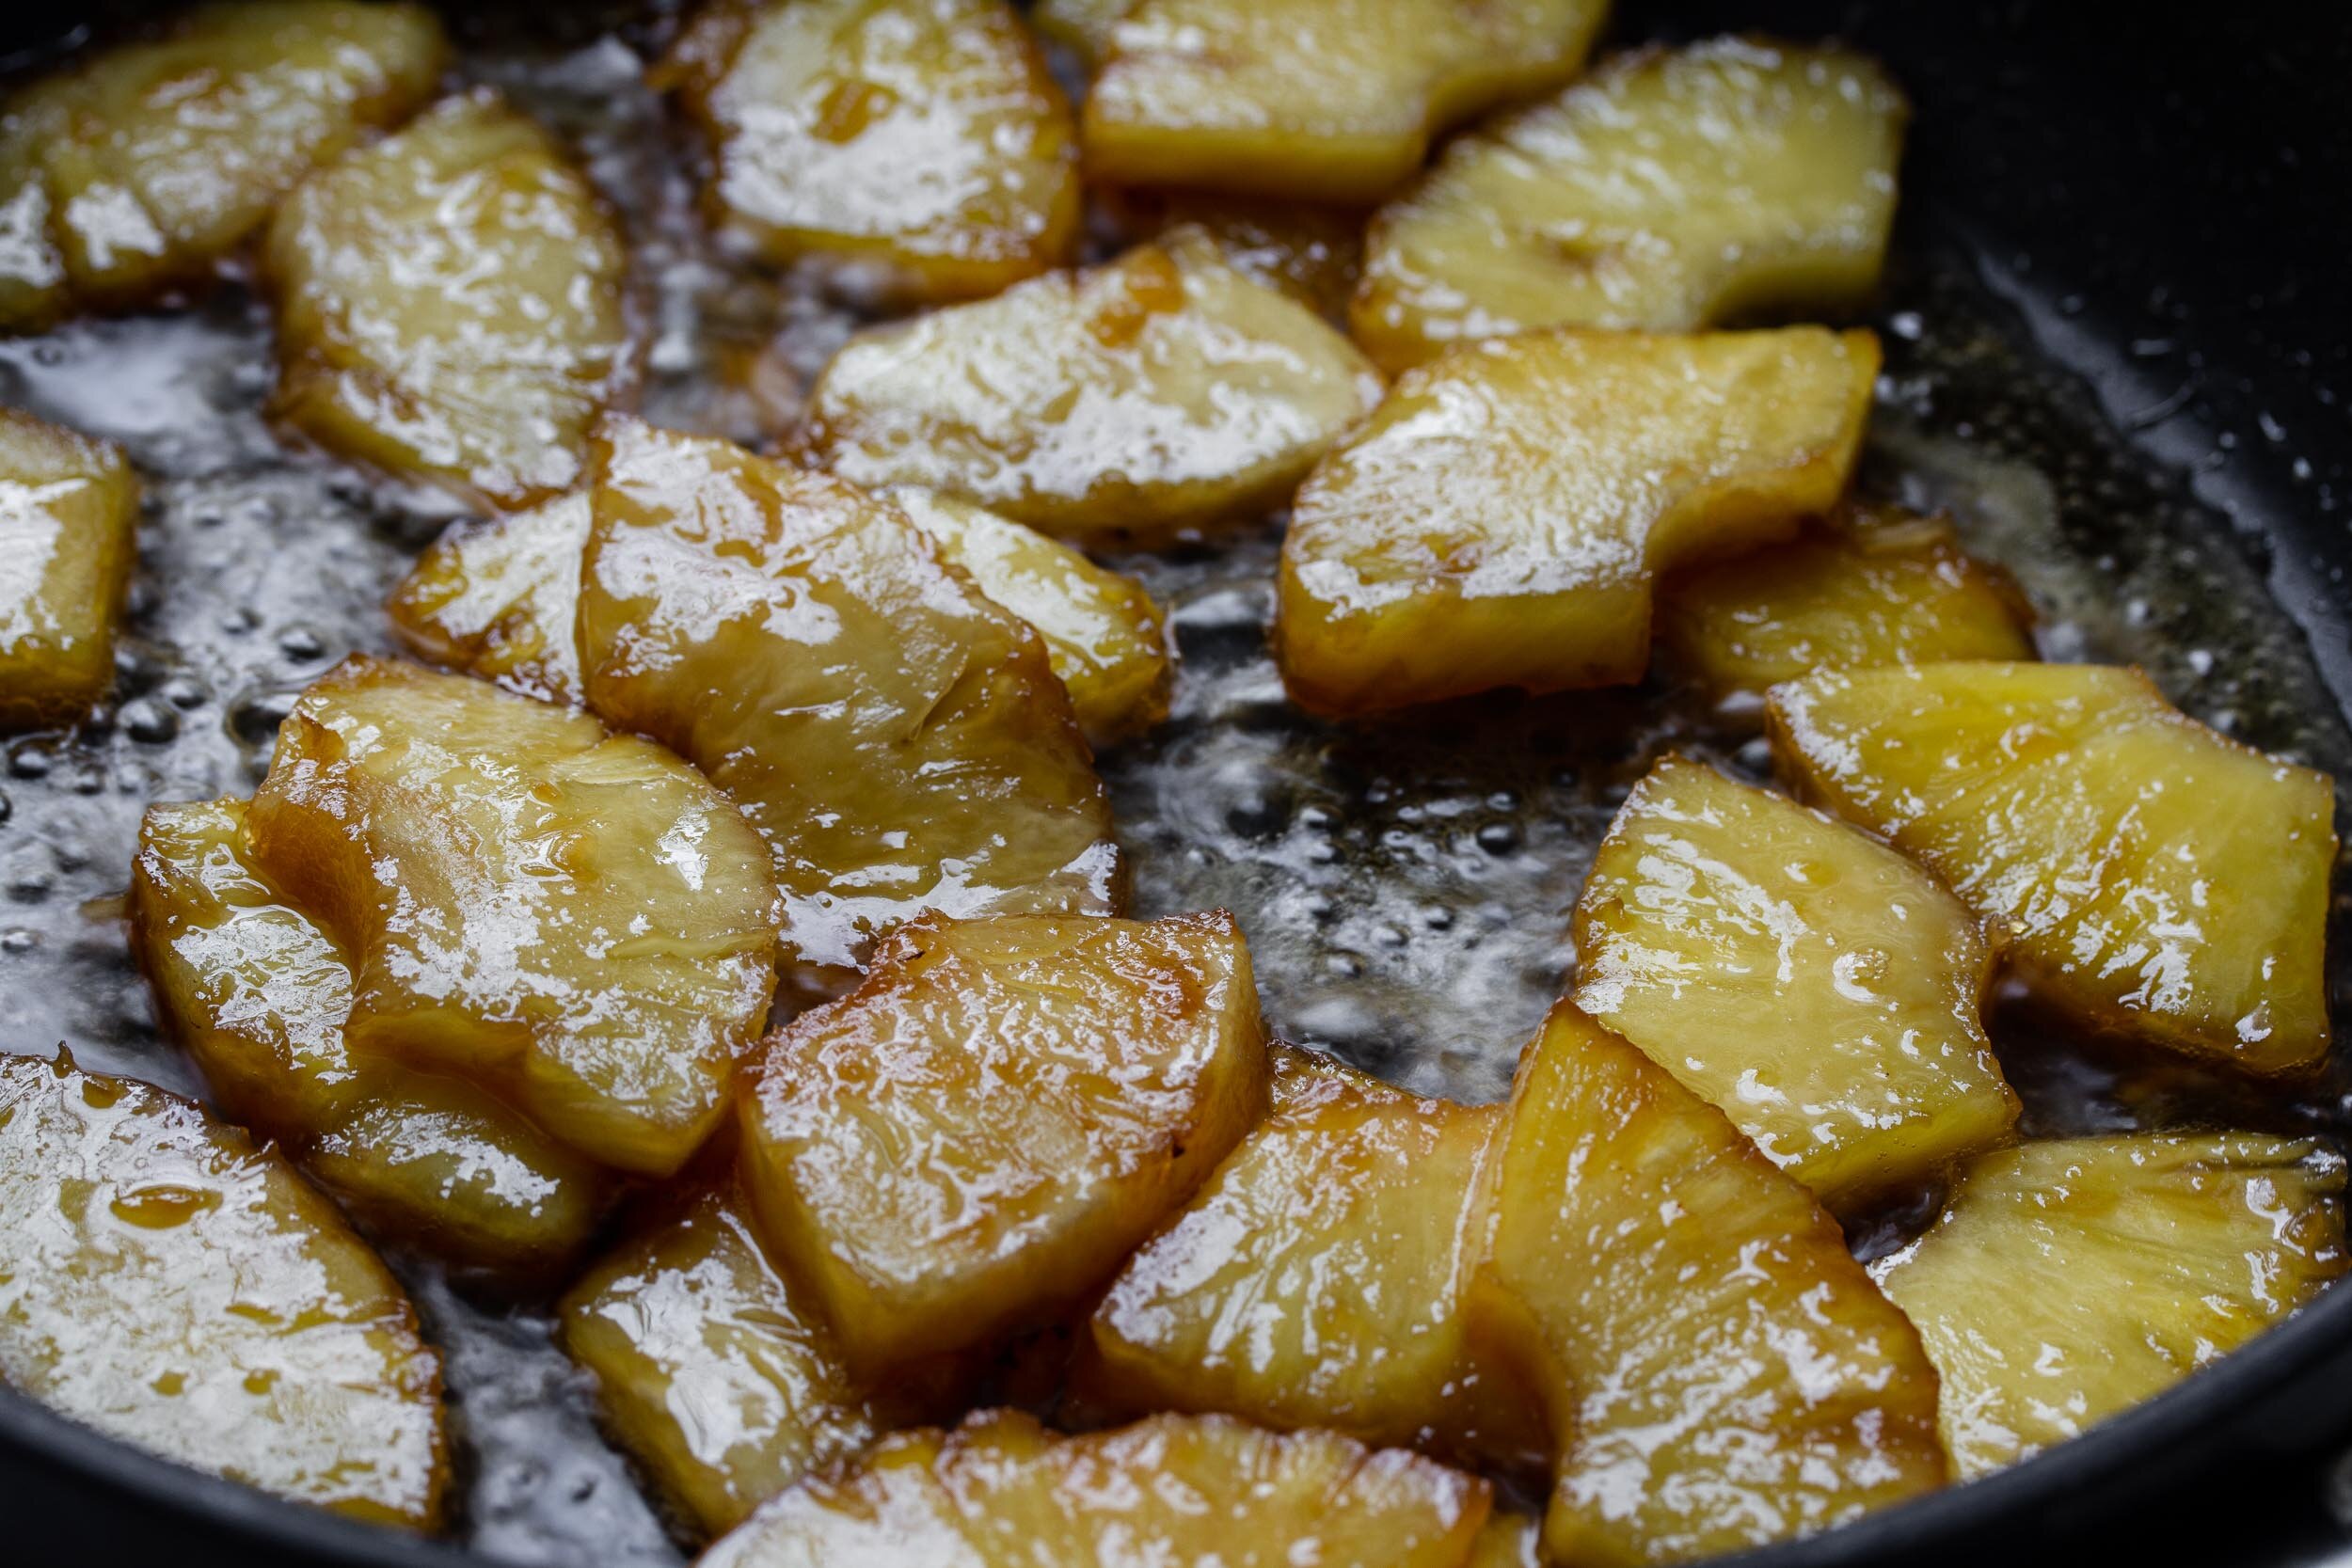  Cook until the fruit releases its juices and the liquid reduces down to a syrup. 